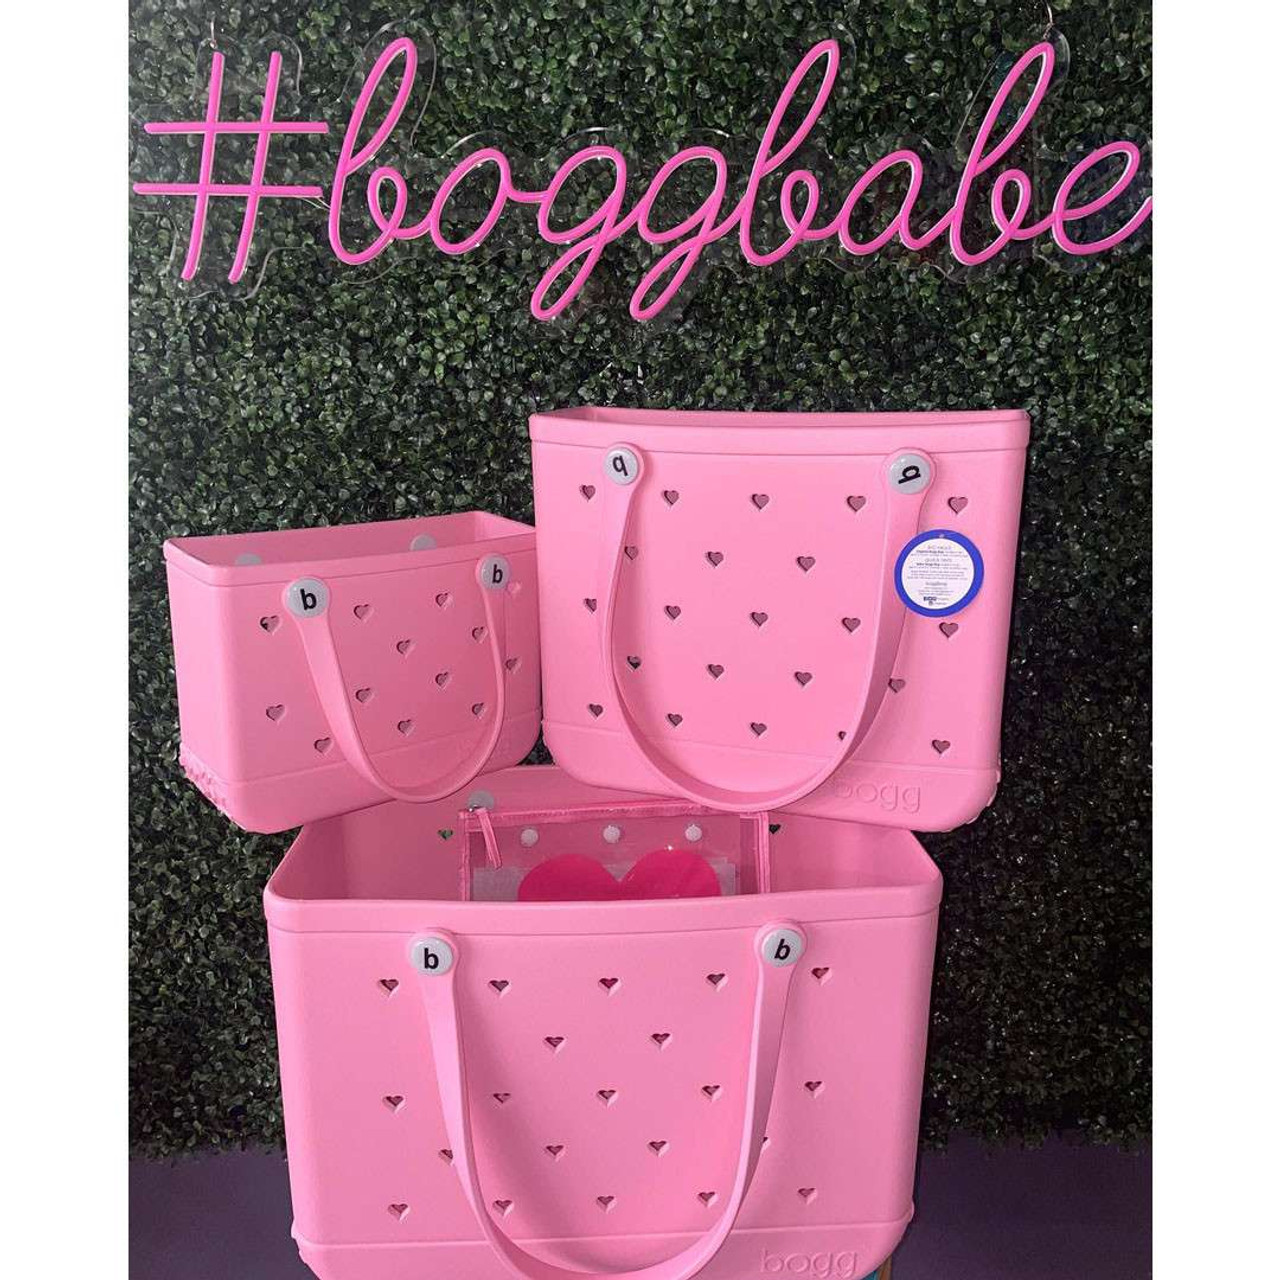 BOGG BAG MINT OFFICIAL NEW WITH TAGS 15" x 13" x 5.25